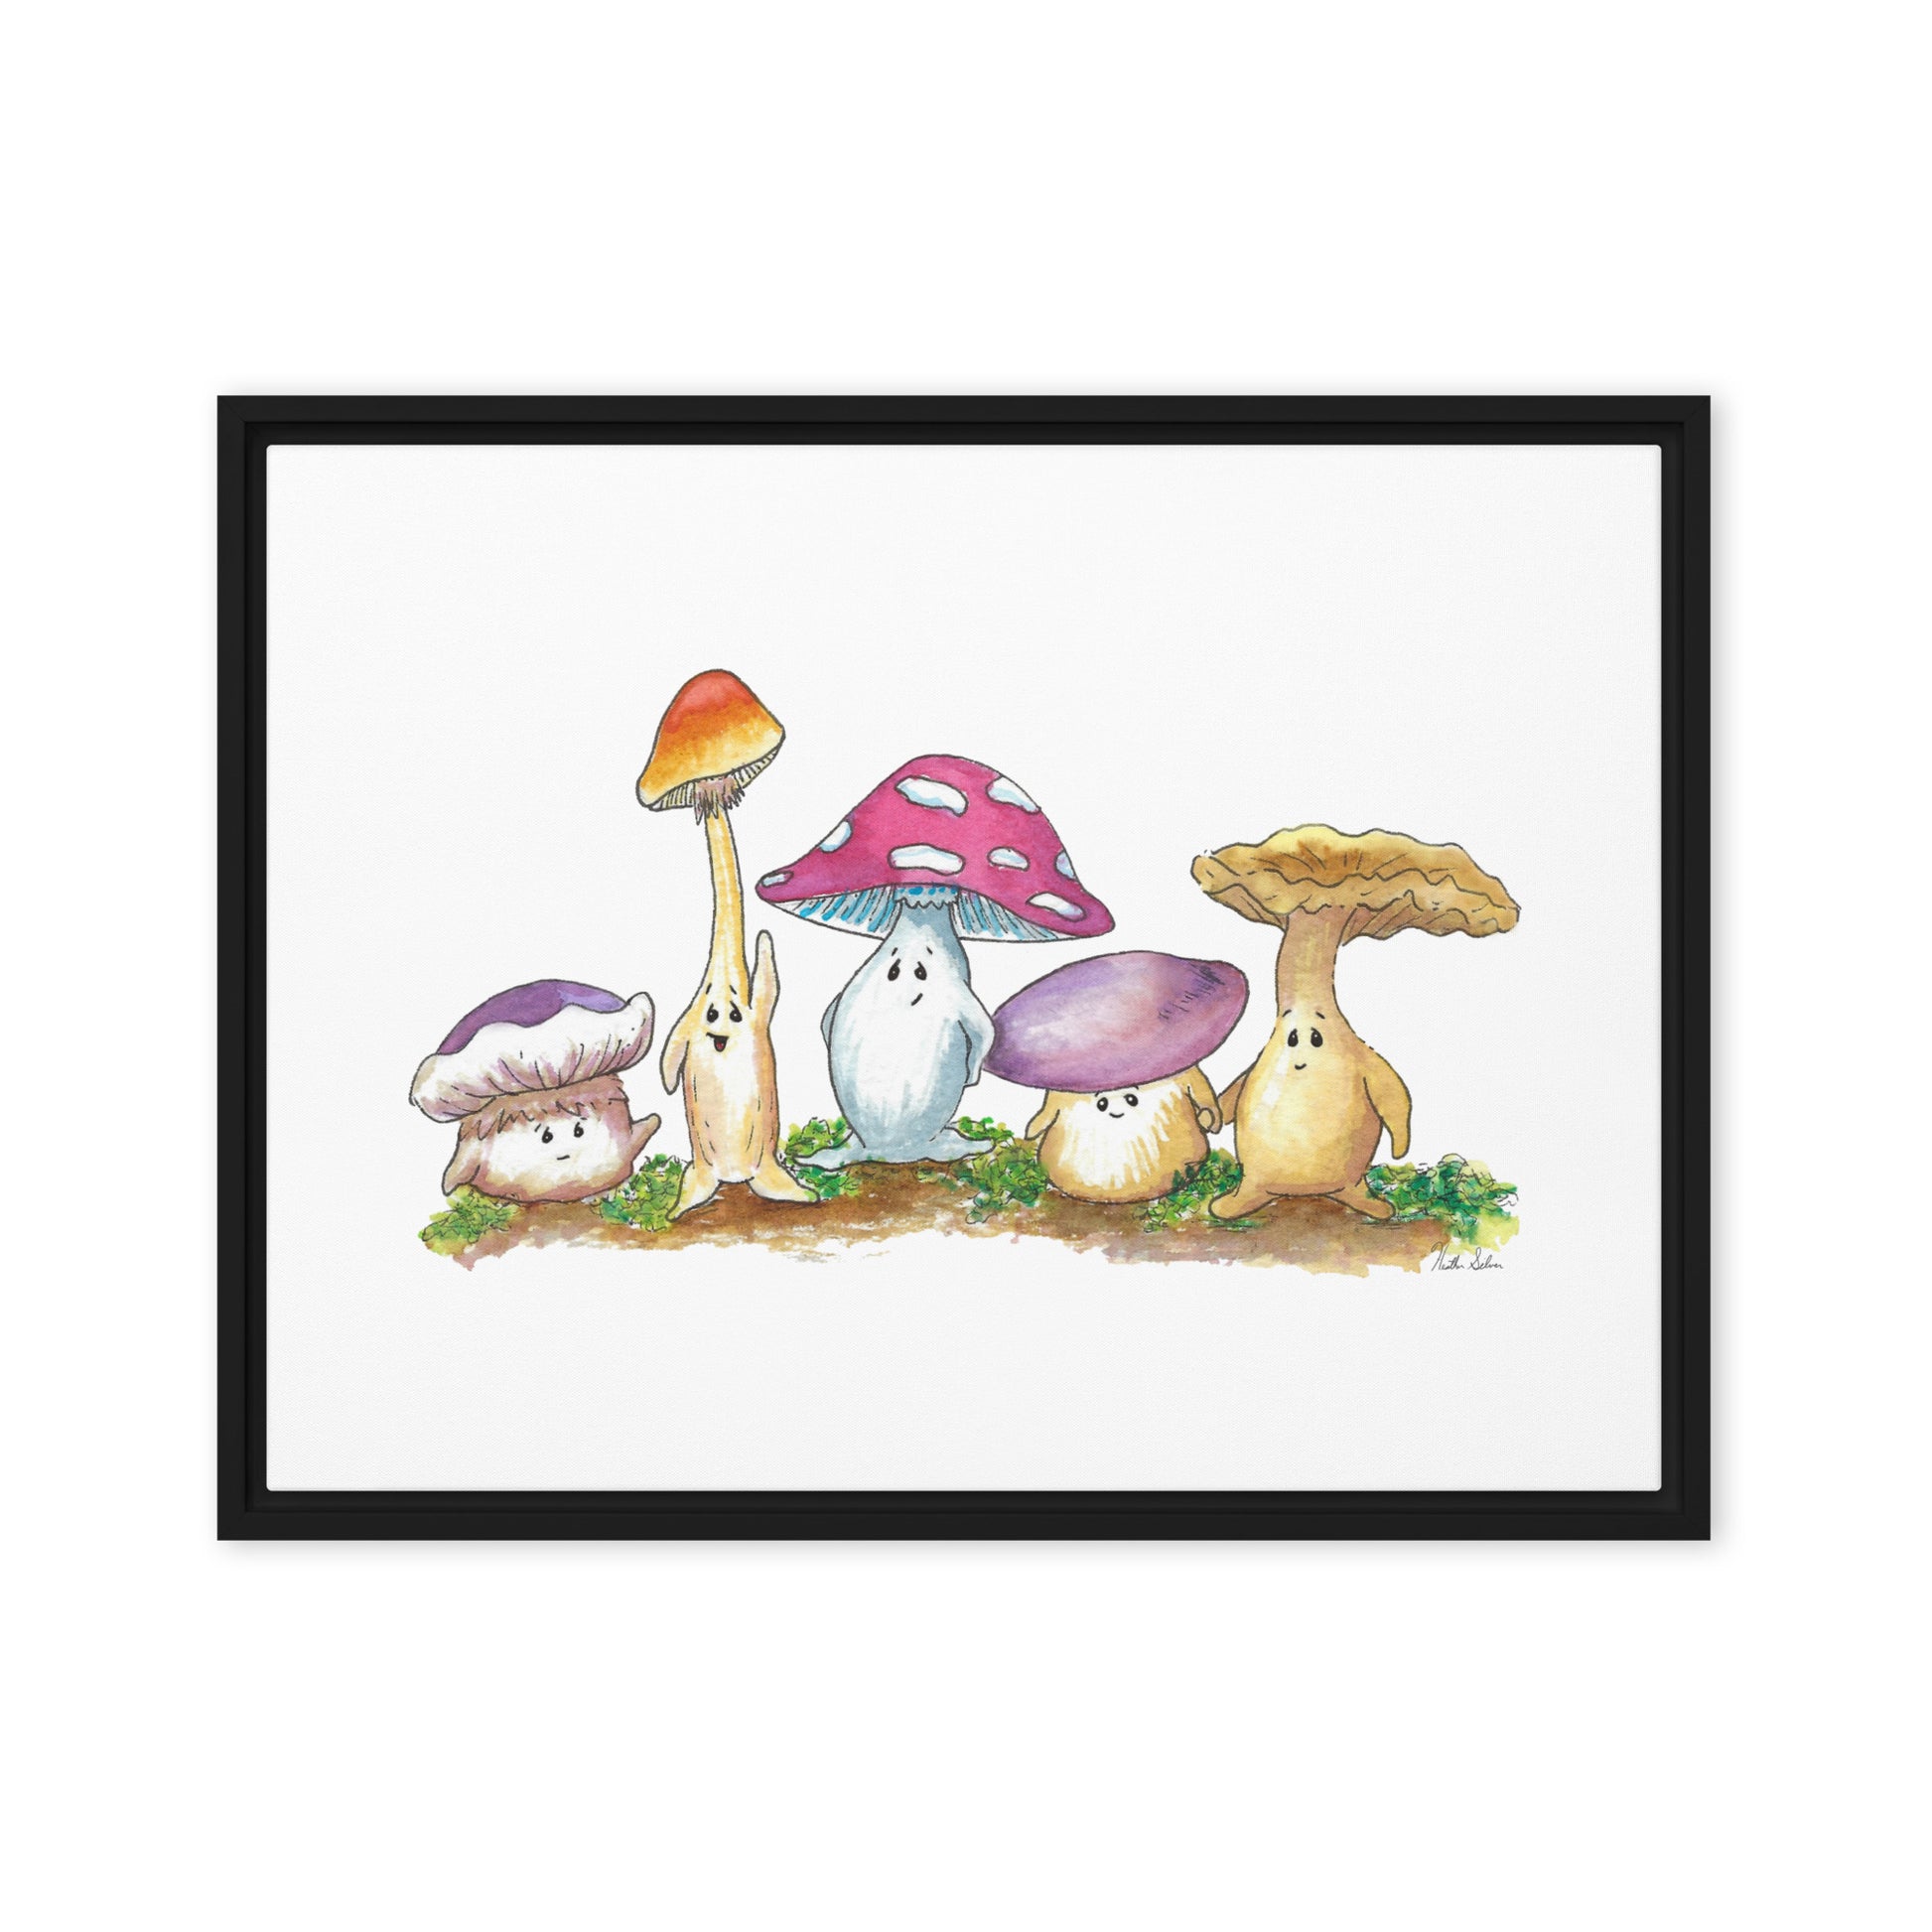 18 by 24 inch canvas print of Heather Silver's watercolor painting, Mushy and Friends. Framed in a black pine wood frame that gives it a floating canvas effect.